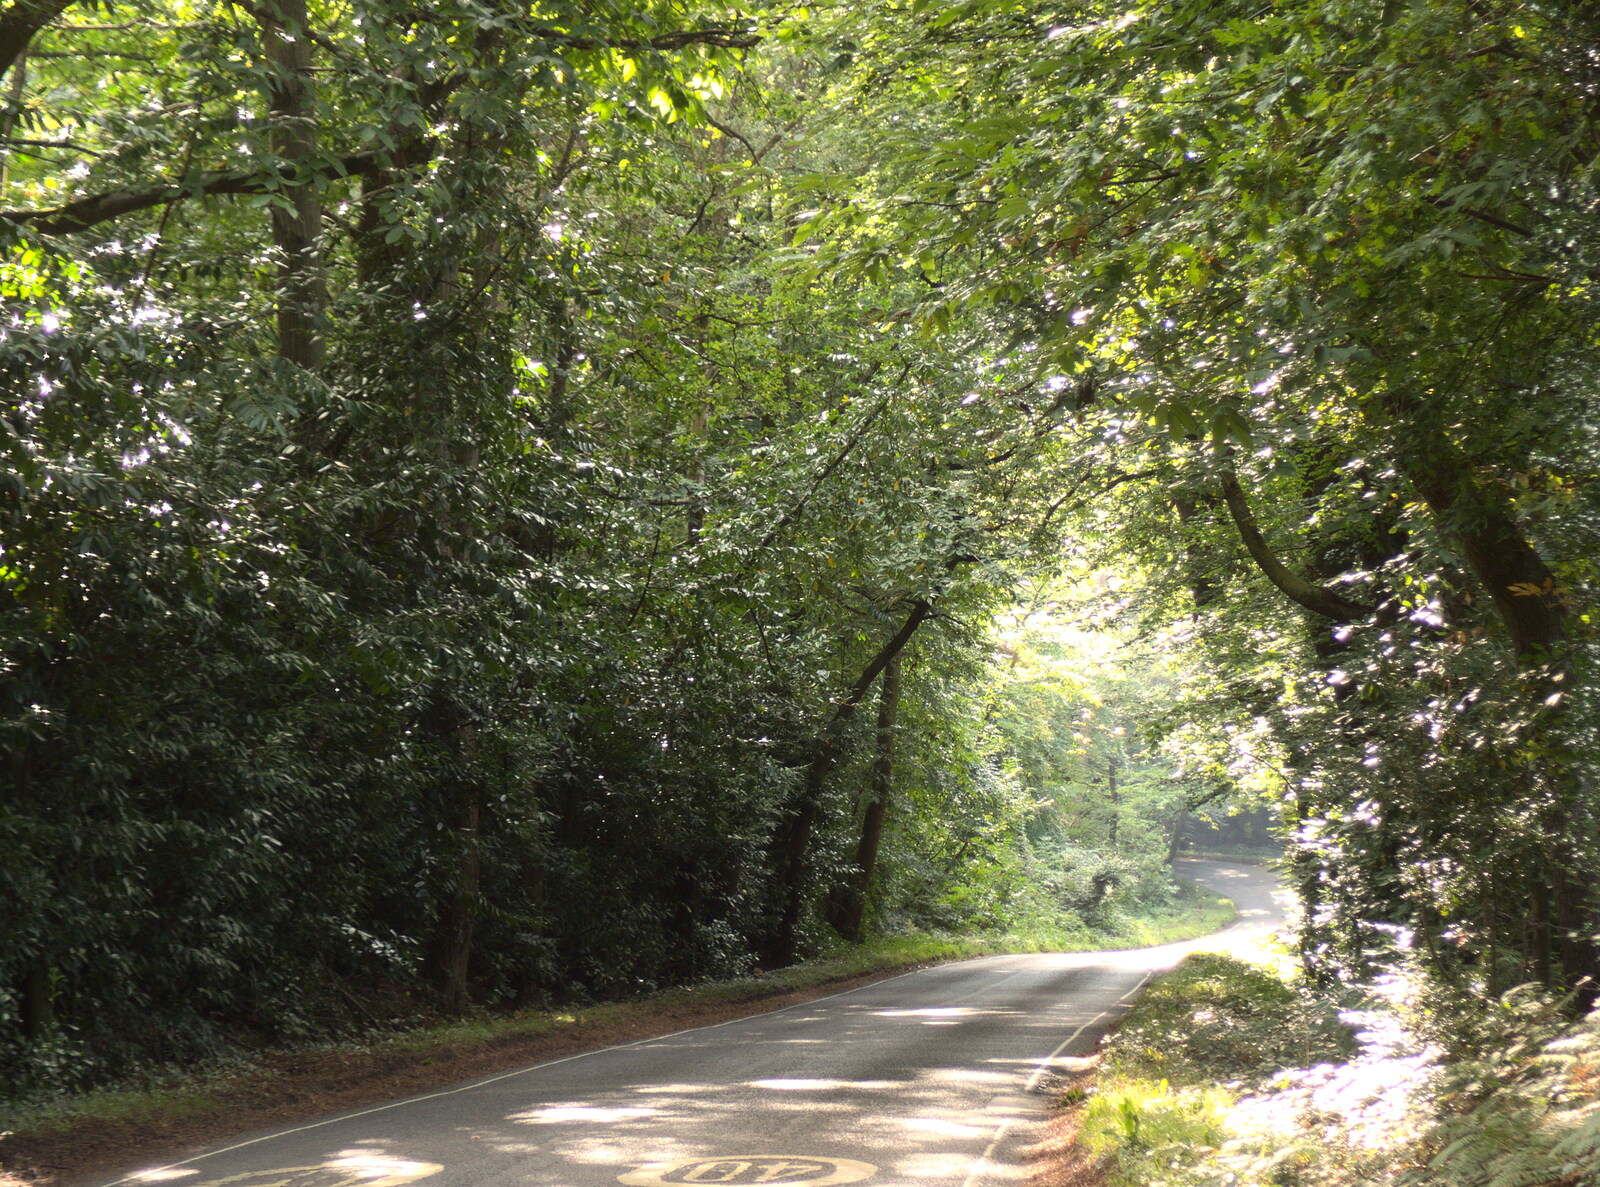 The road towards Holmesley in the New Forest from Grandmother's Wake, Winkton, Christchurch, Dorset - 18th September 2017